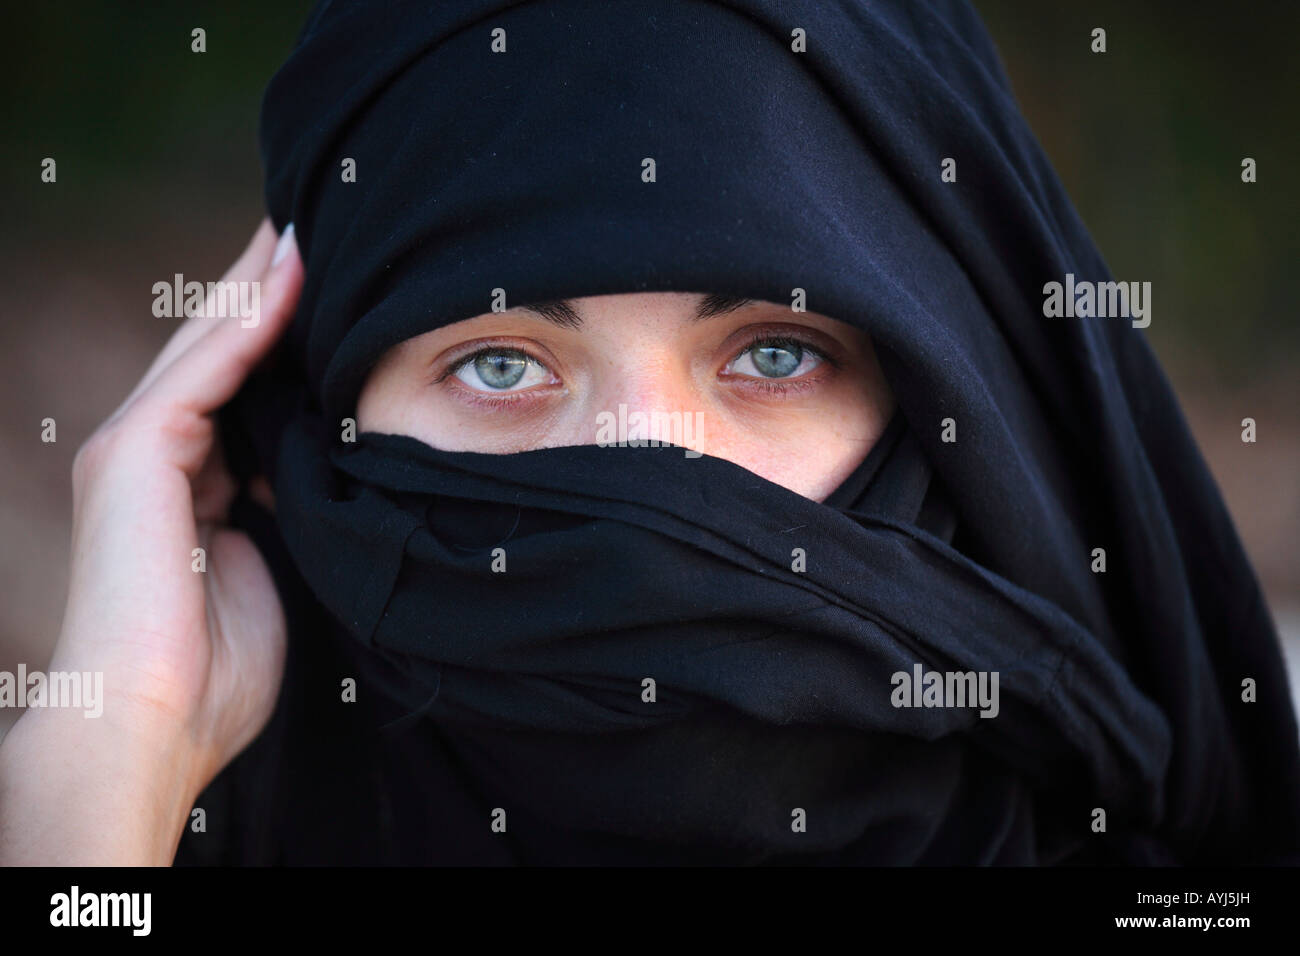 Young woman wearing black veil Stock Photo